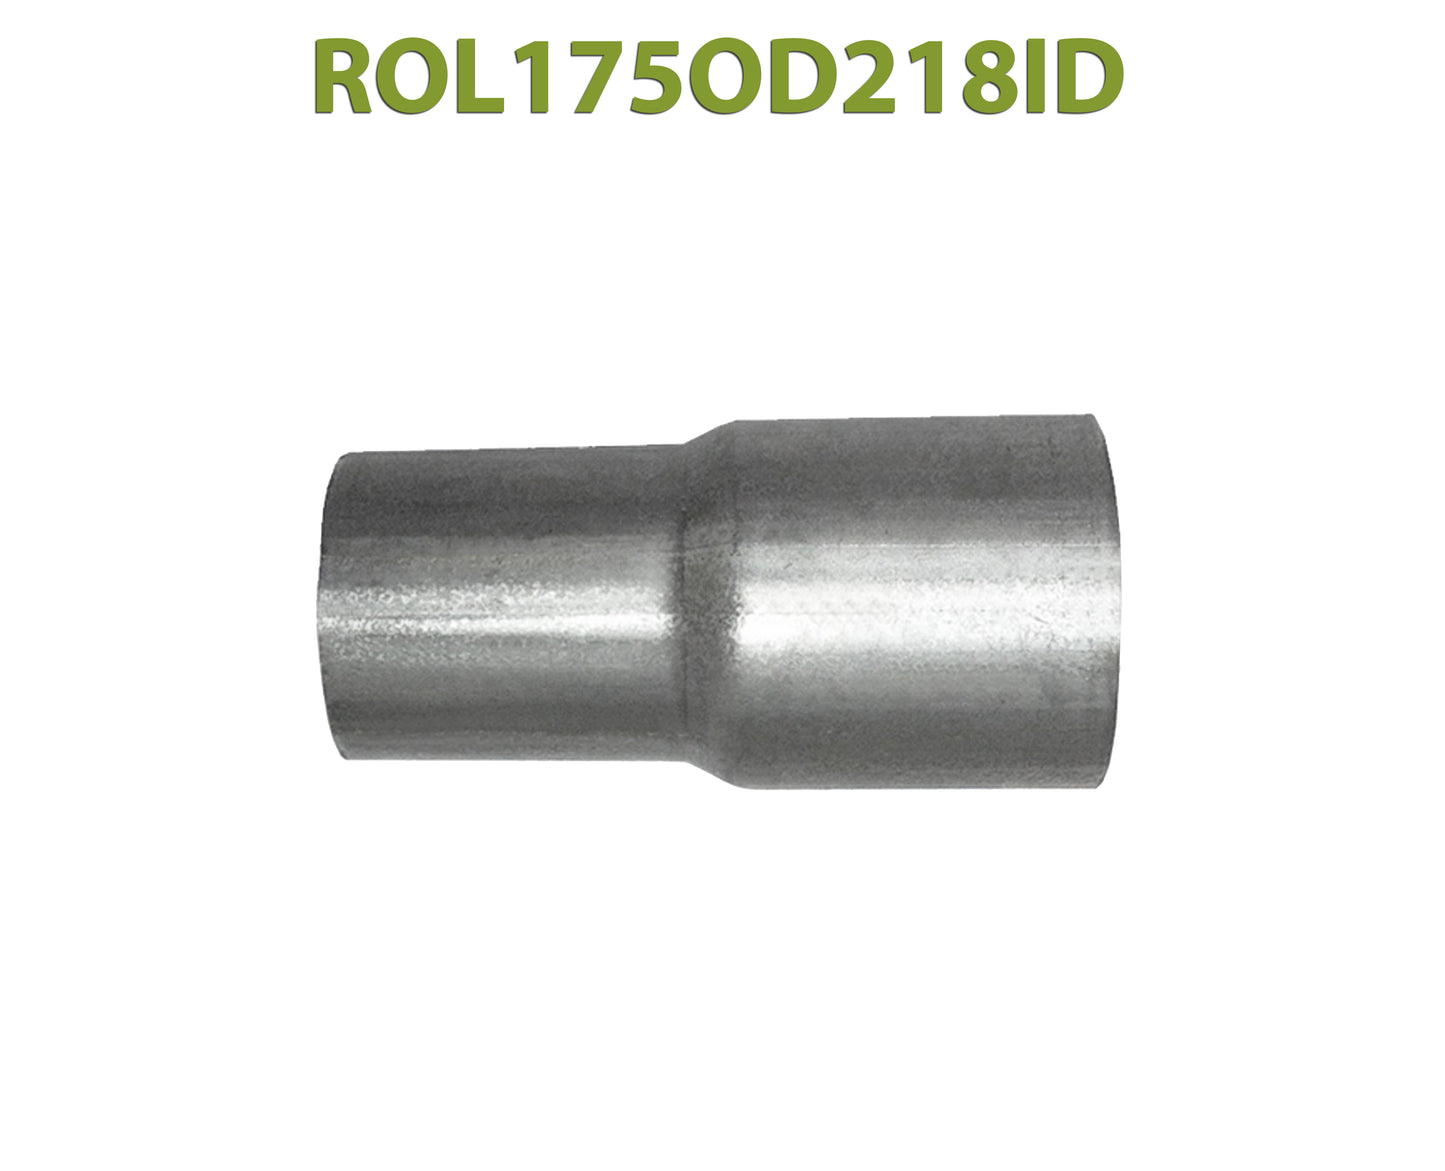 ROL175OD218ID 548535 1 3/4” OD to 2 1/8” ID Universal Exhaust Component to Pipe Adapter Reducer